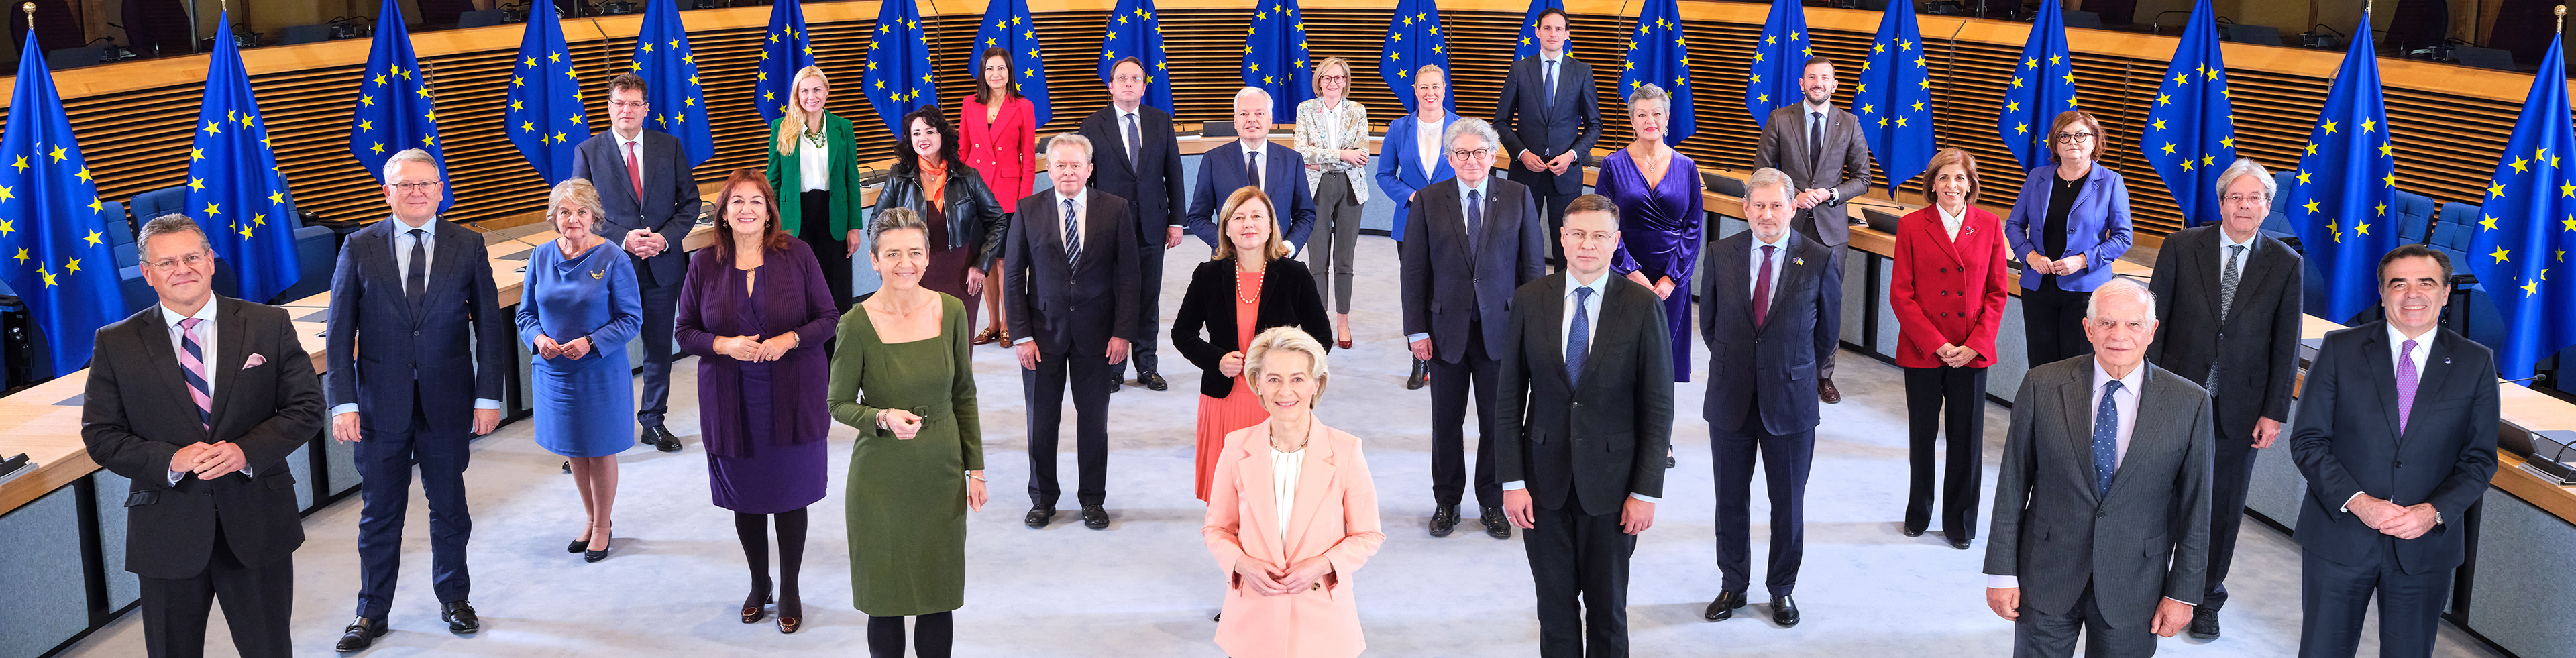 The whole VDL commission with the president in front